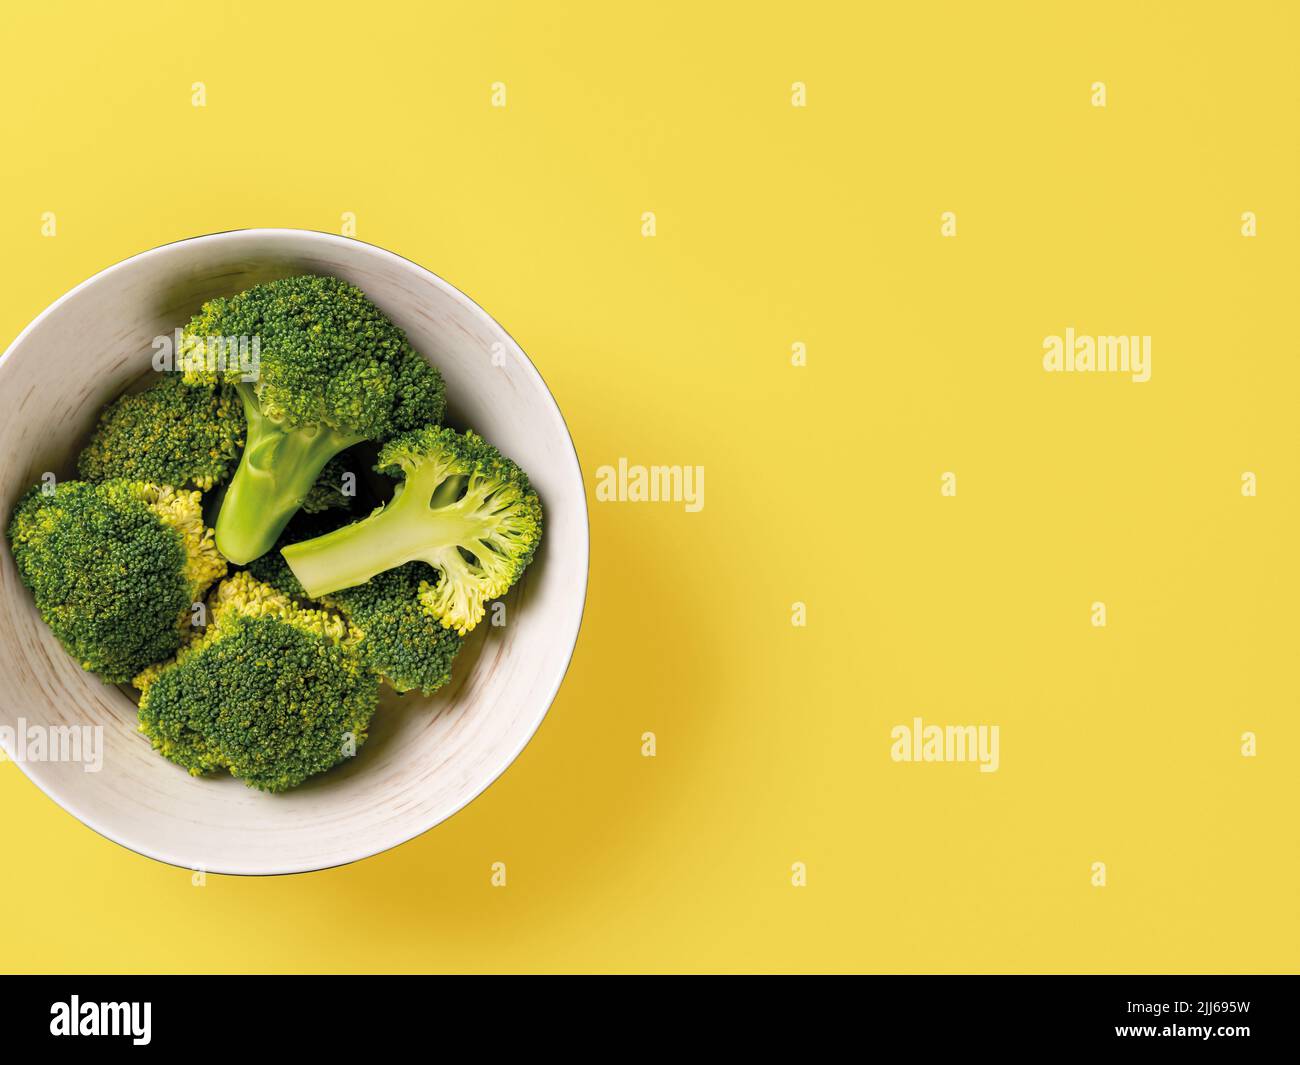 Raw green broccoli florets in a bowl against yellow background. Vitamin vegetarian food recipe. Concept low calories vegetarian dieting. Copy space. Stock Photo